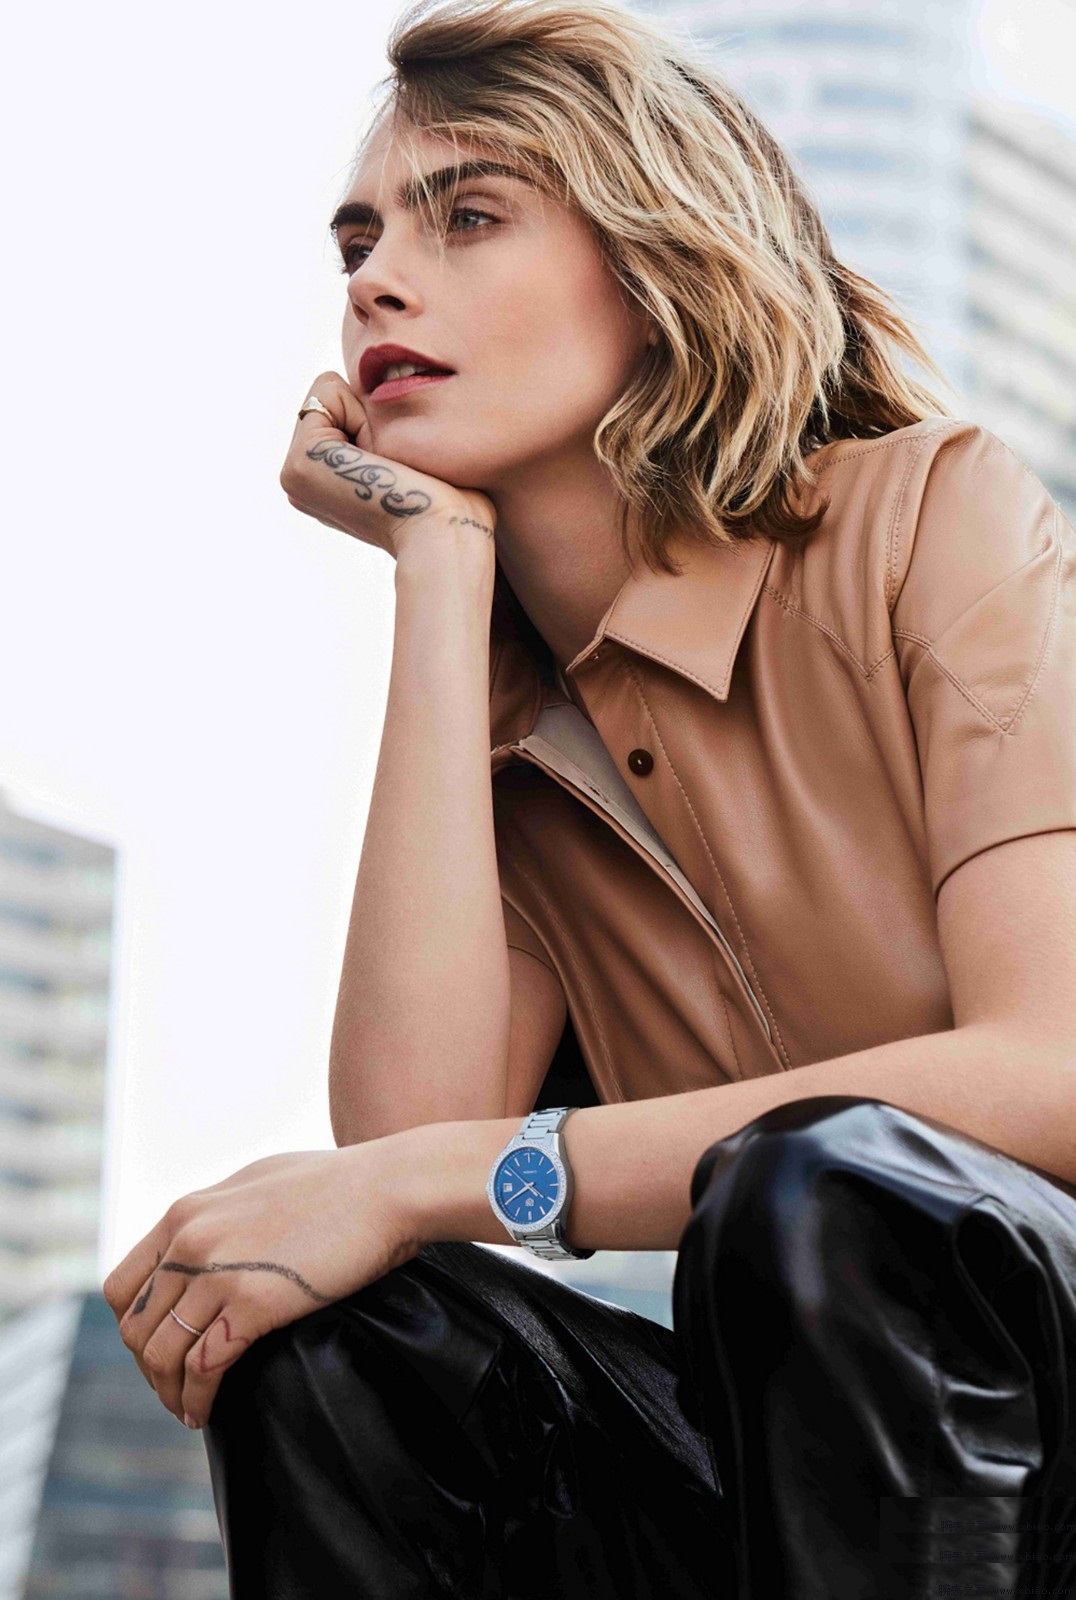 Cara Delevingne wears the blue dial fake TAG Heuer Carrera watch.